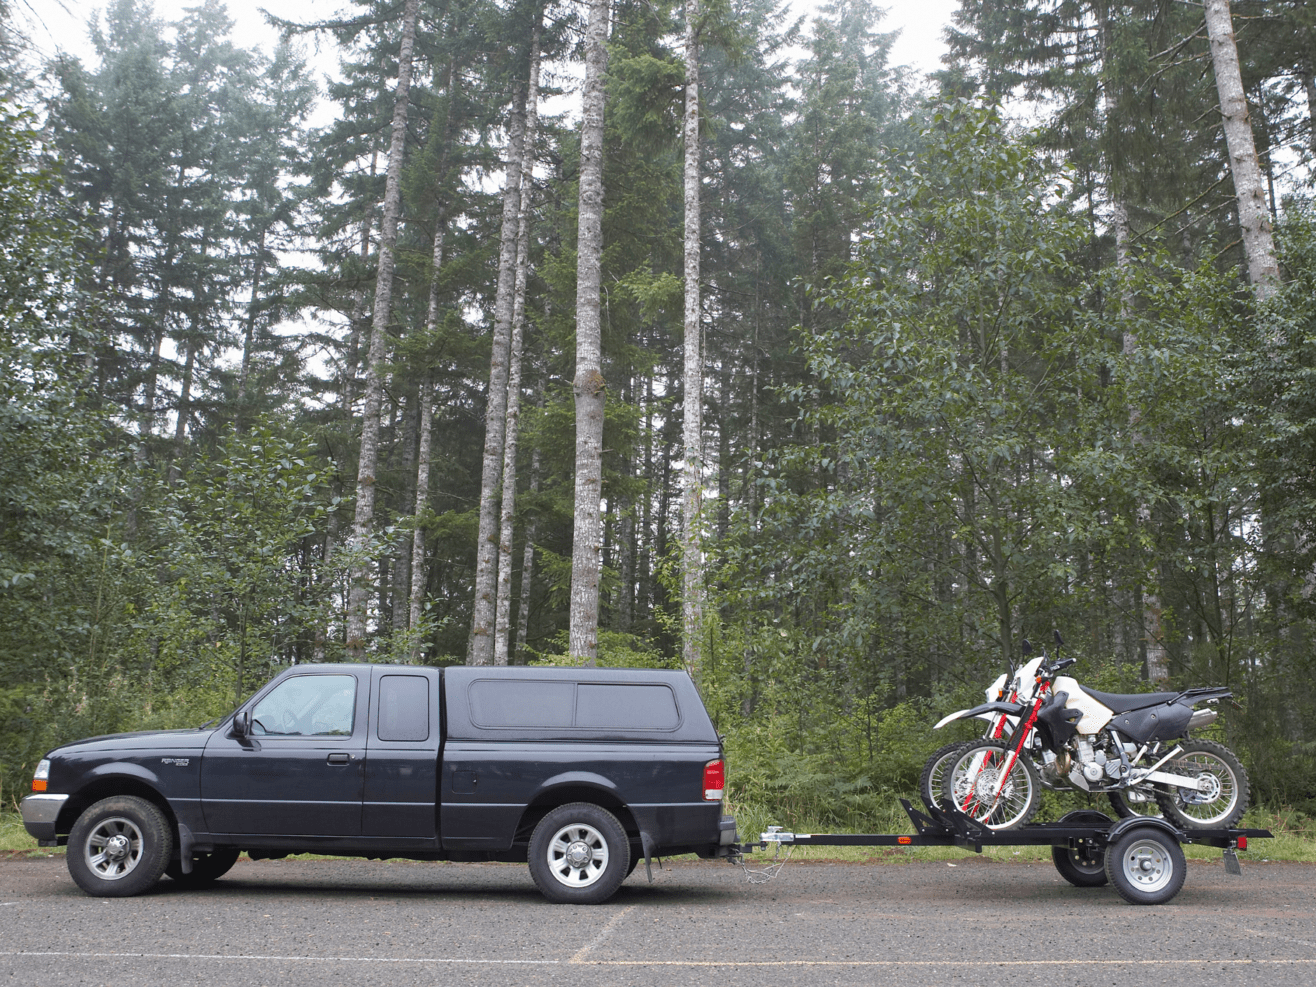 this image shows motorcycle towing services in Soldotna, AK